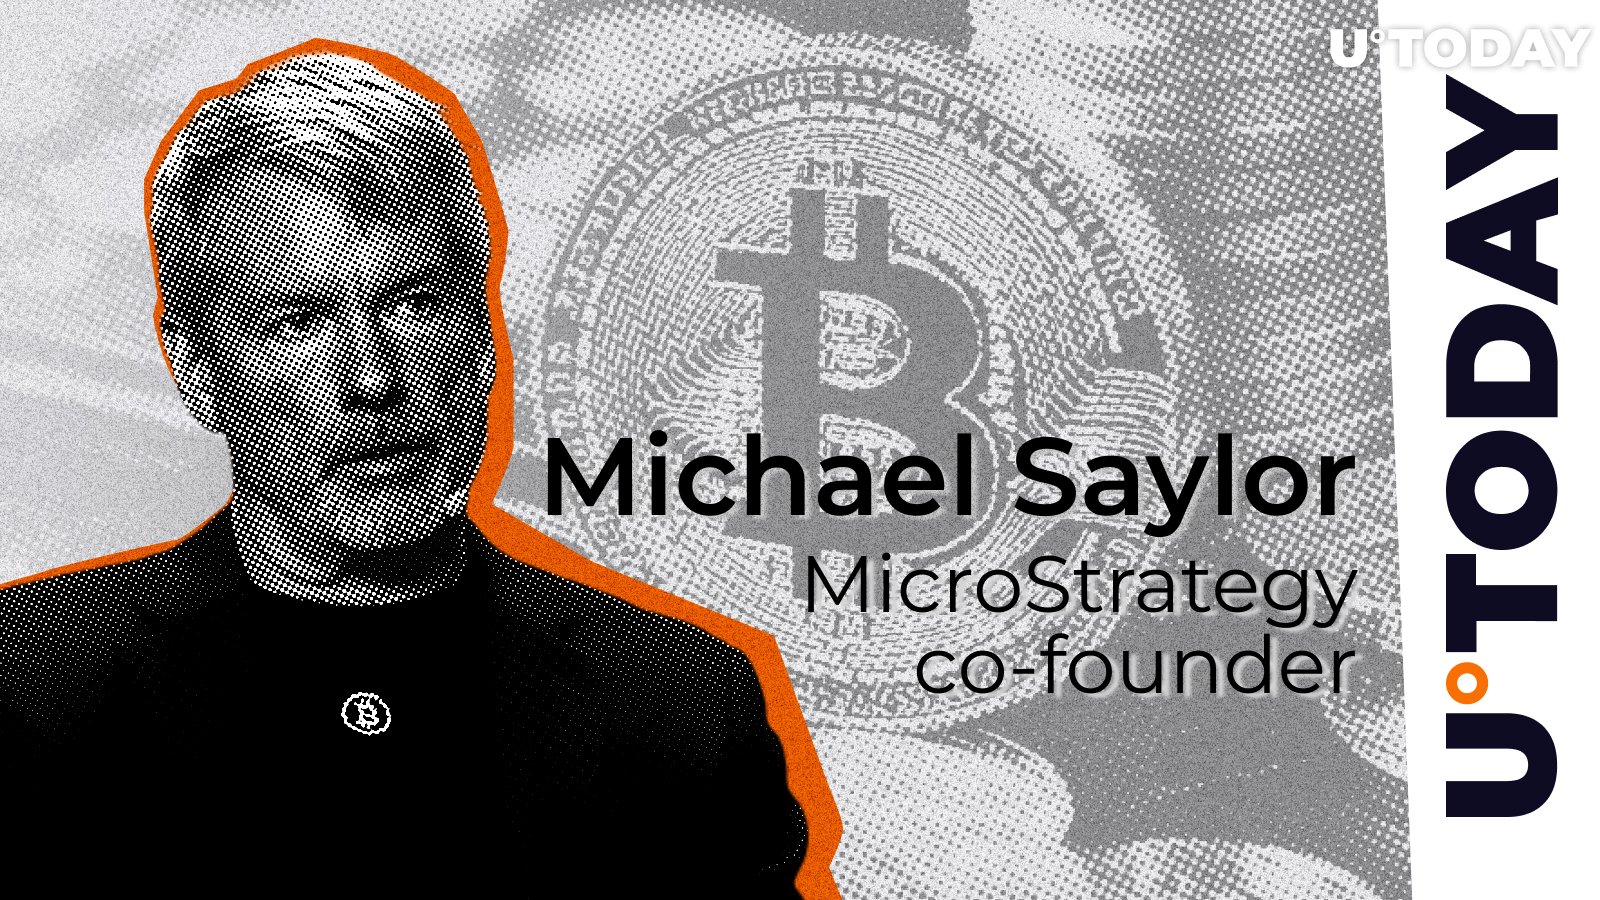 Important "Satoshi Bitcoin" Reminder Issued by Michael Saylor